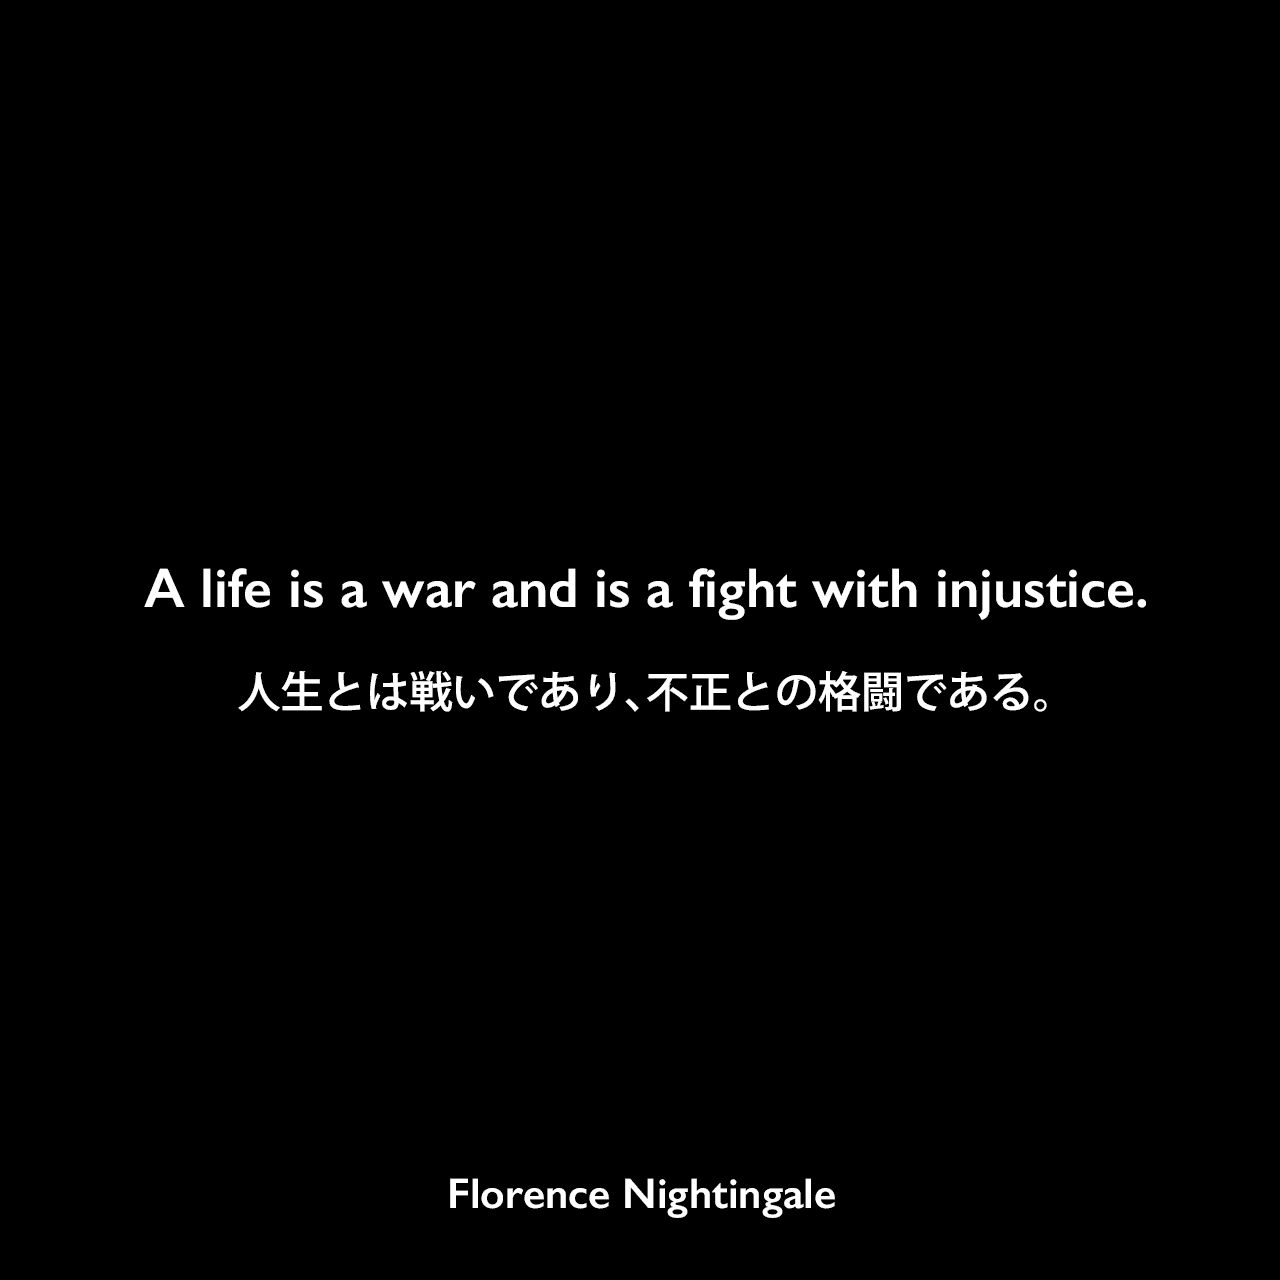 A life is a war and is a fight with injustice.人生とは戦いであり、不正との格闘である。Florence Nightingale